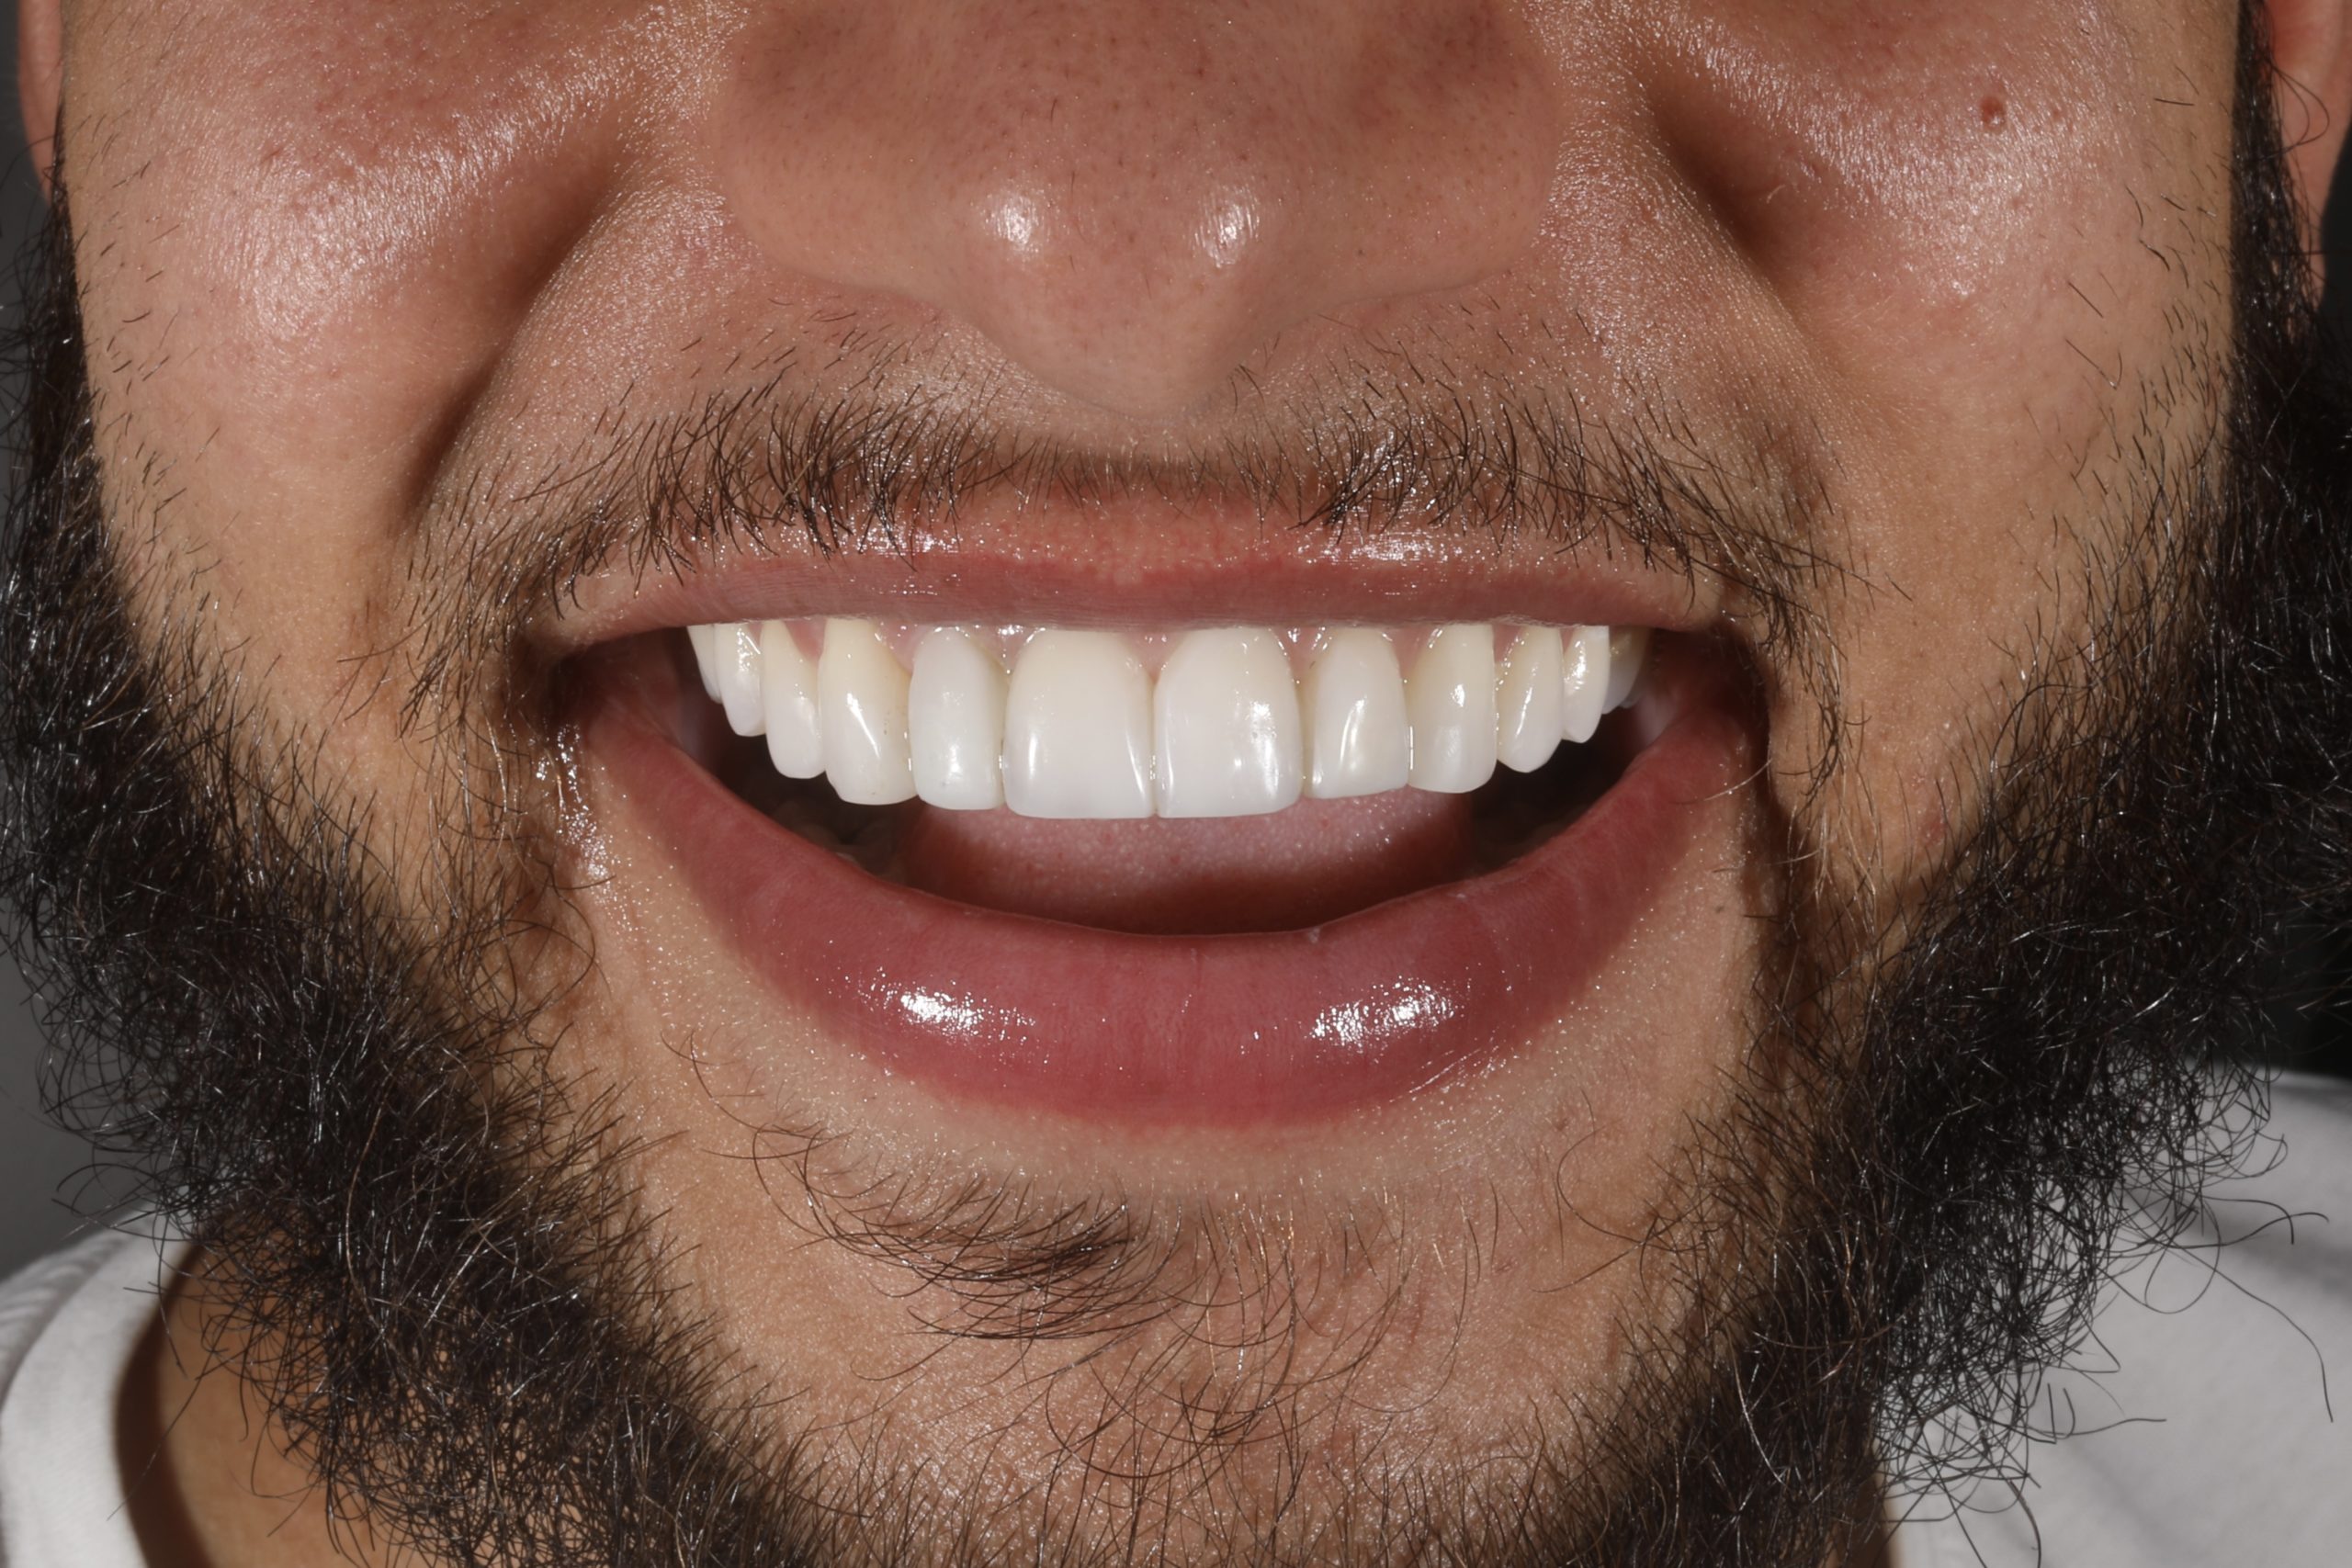 Creating a neater smile with composite edge bonding